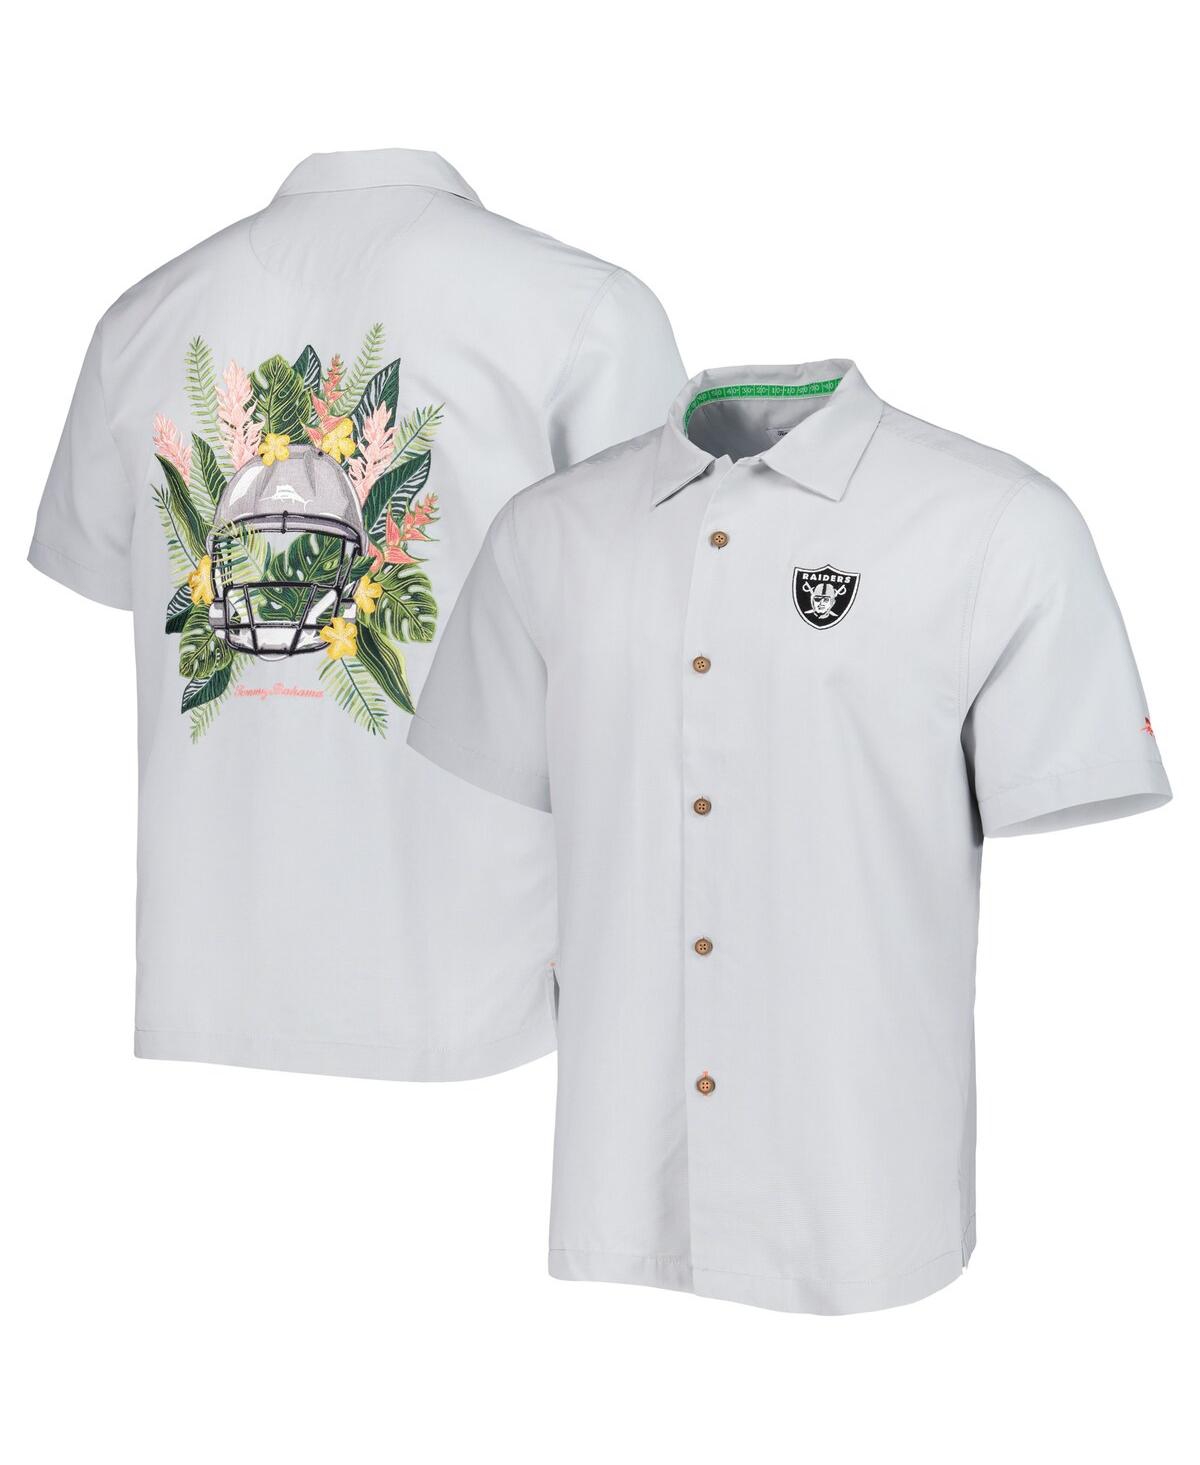 TOMMY BAHAMA MEN'S TOMMY BAHAMA GRAY LAS VEGAS RAIDERS COCONUT POINT FRONDLY FAN CAMP ISLANDZONE BUTTON-UP SHIRT